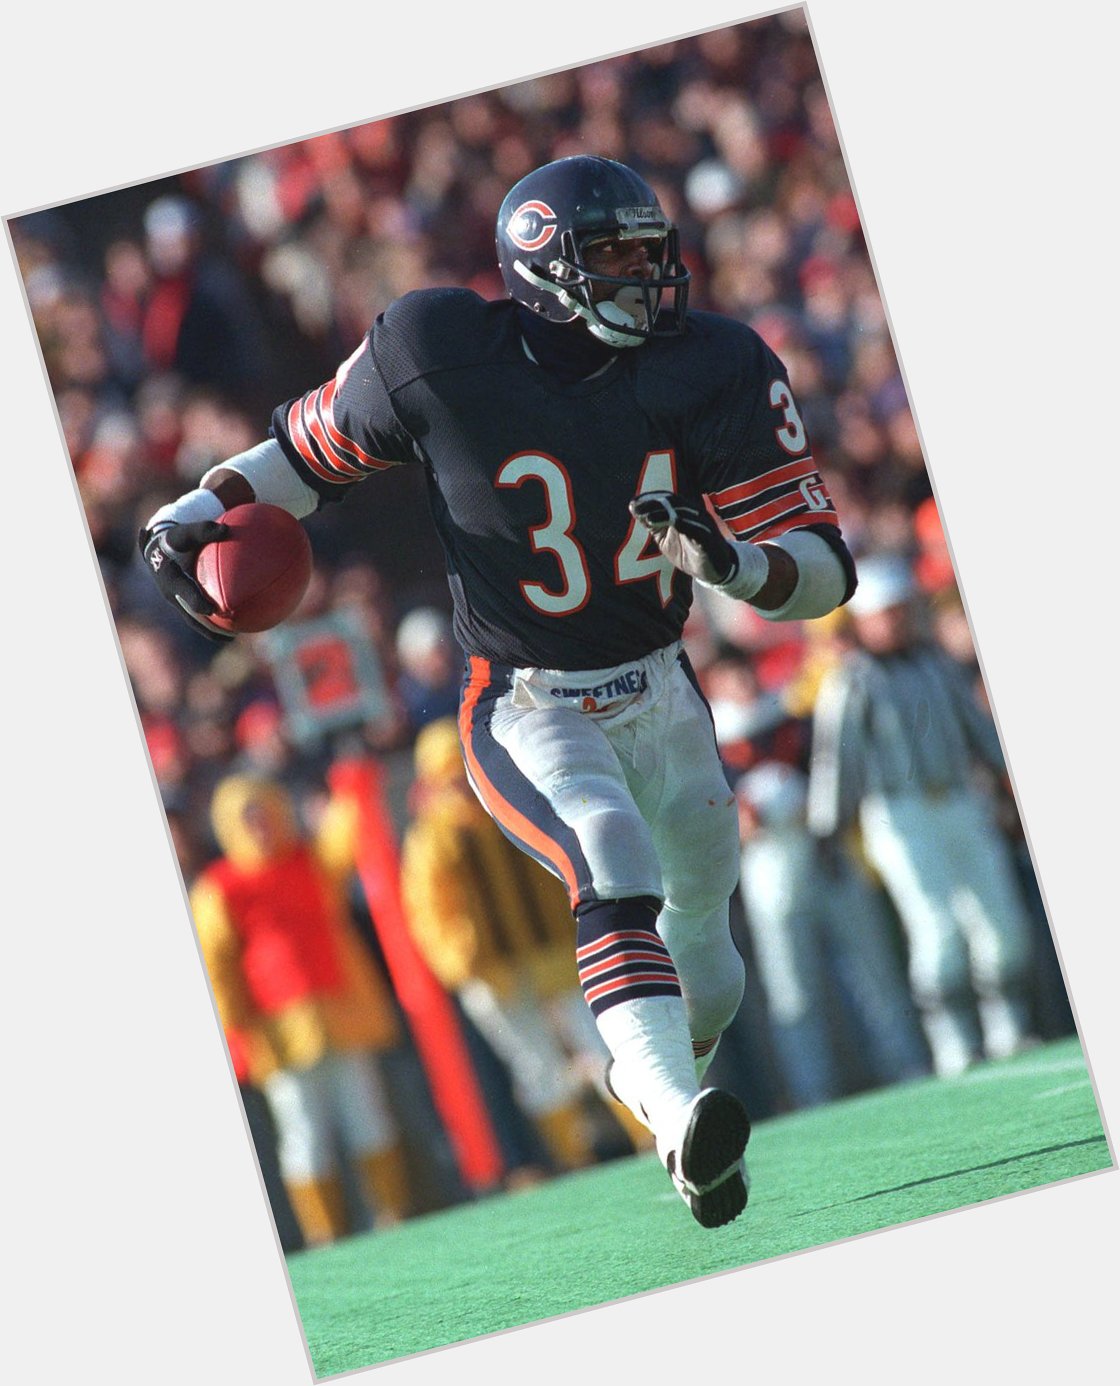 Happy Birthday to Walter Payton who would have turned 63 today! 